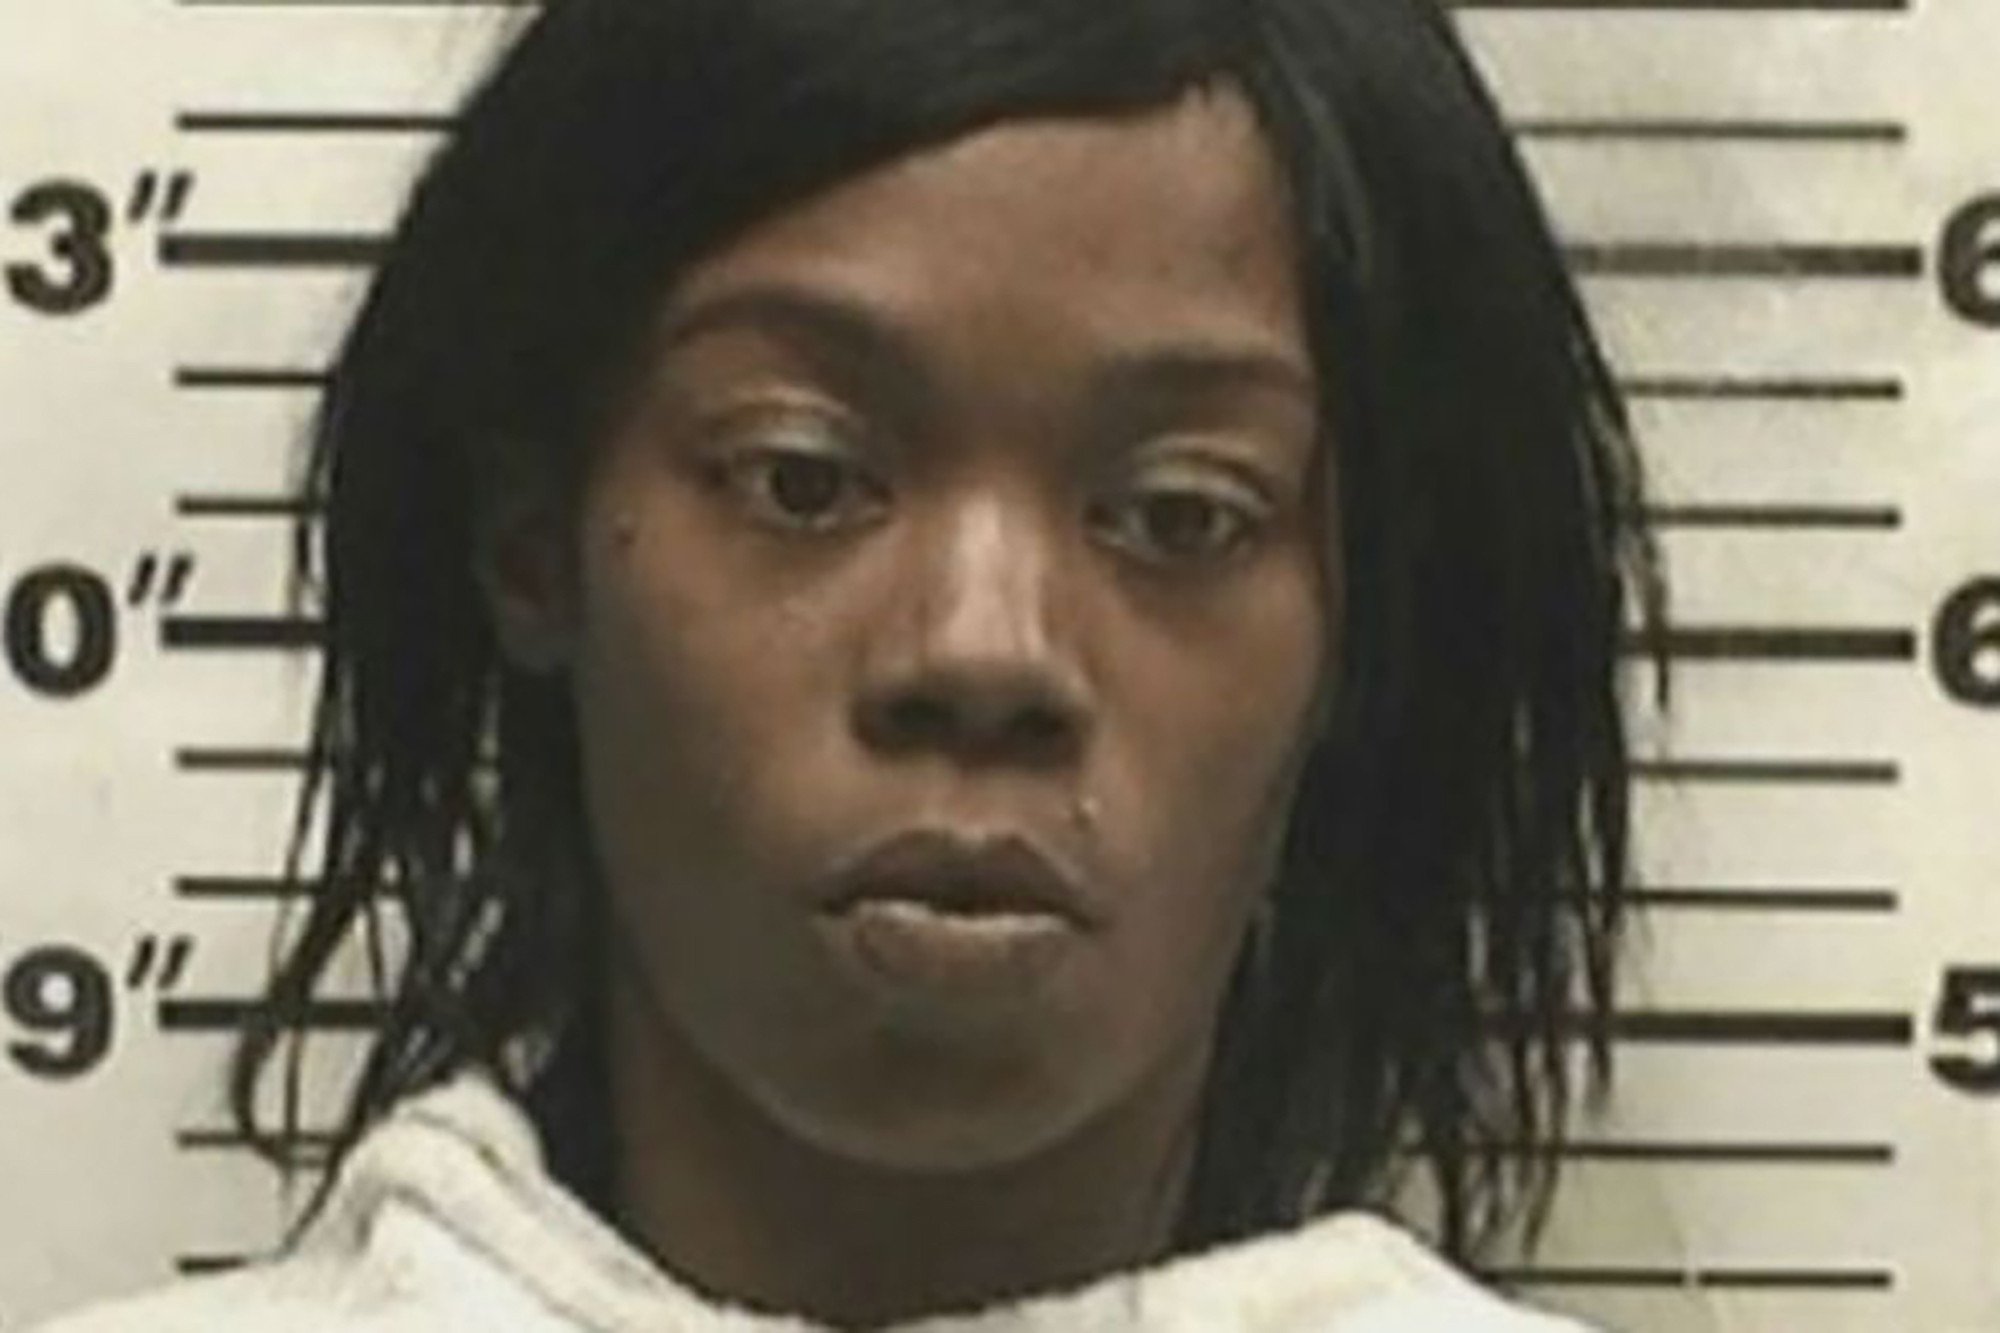 Woman pooped her pants to hide drugs during arrest: cops